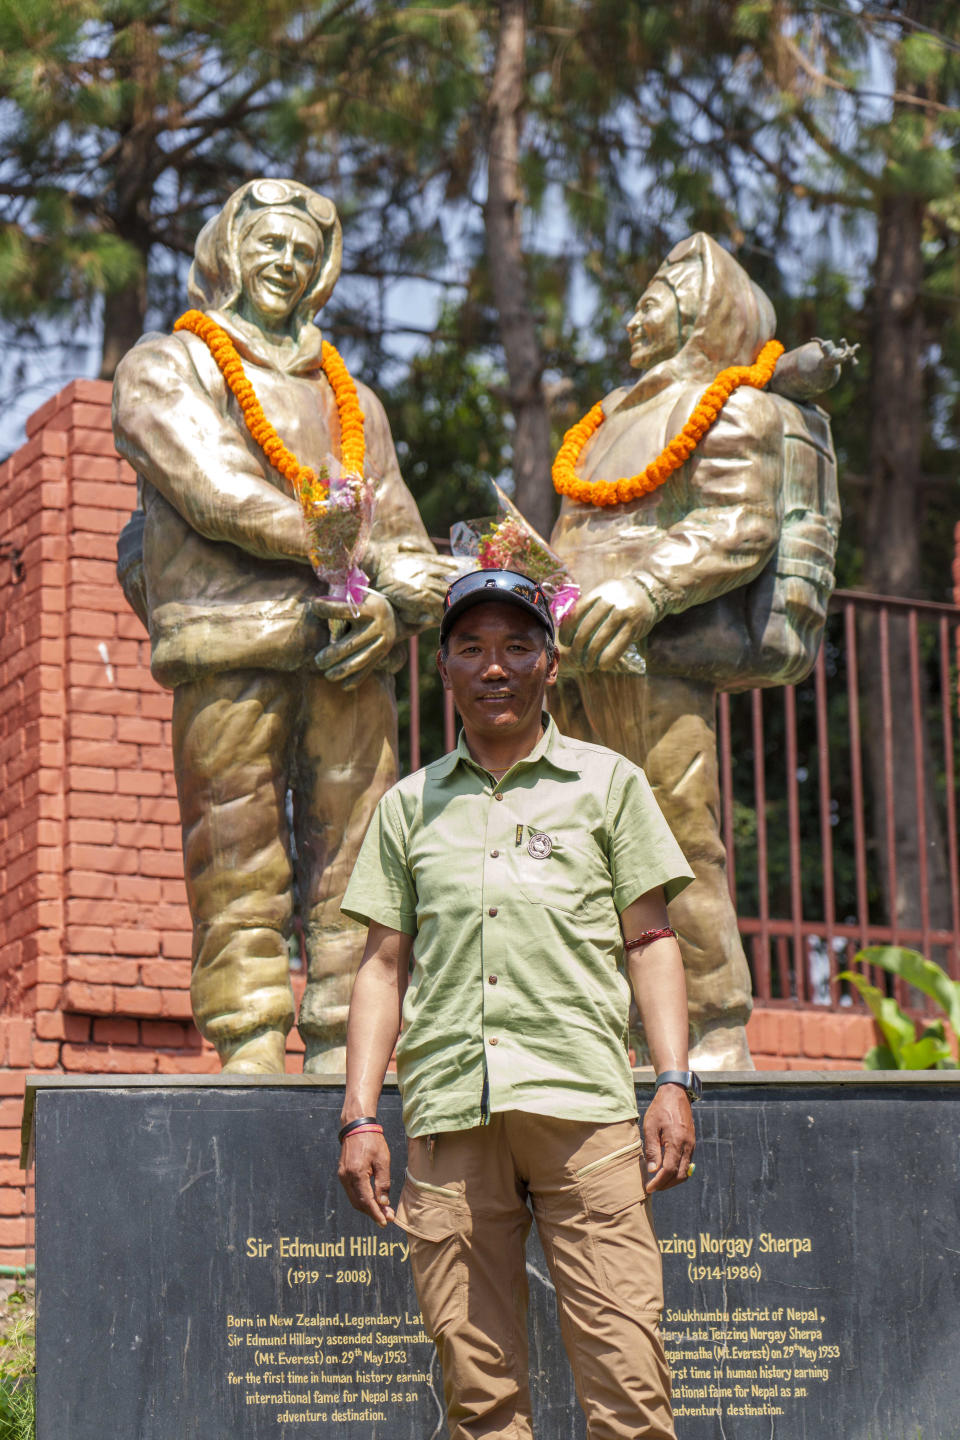 Record holder Veteran Sherpa guide Kami Rita poses for a photo in front of the statues of New Zealander Edmund Hillary, left, and his Sherpa guide Tenzing Norgay on the 70 anniversary of the first ascent of Mount Everest in Kathmandu, Nepal, Monday, May 29, 2023. The 8,849-meter (29,032-foot) mountain peak was first scaled by Hillary and Norgay on May 29, 1953. (AP Photo/Niranjan Shrestha)